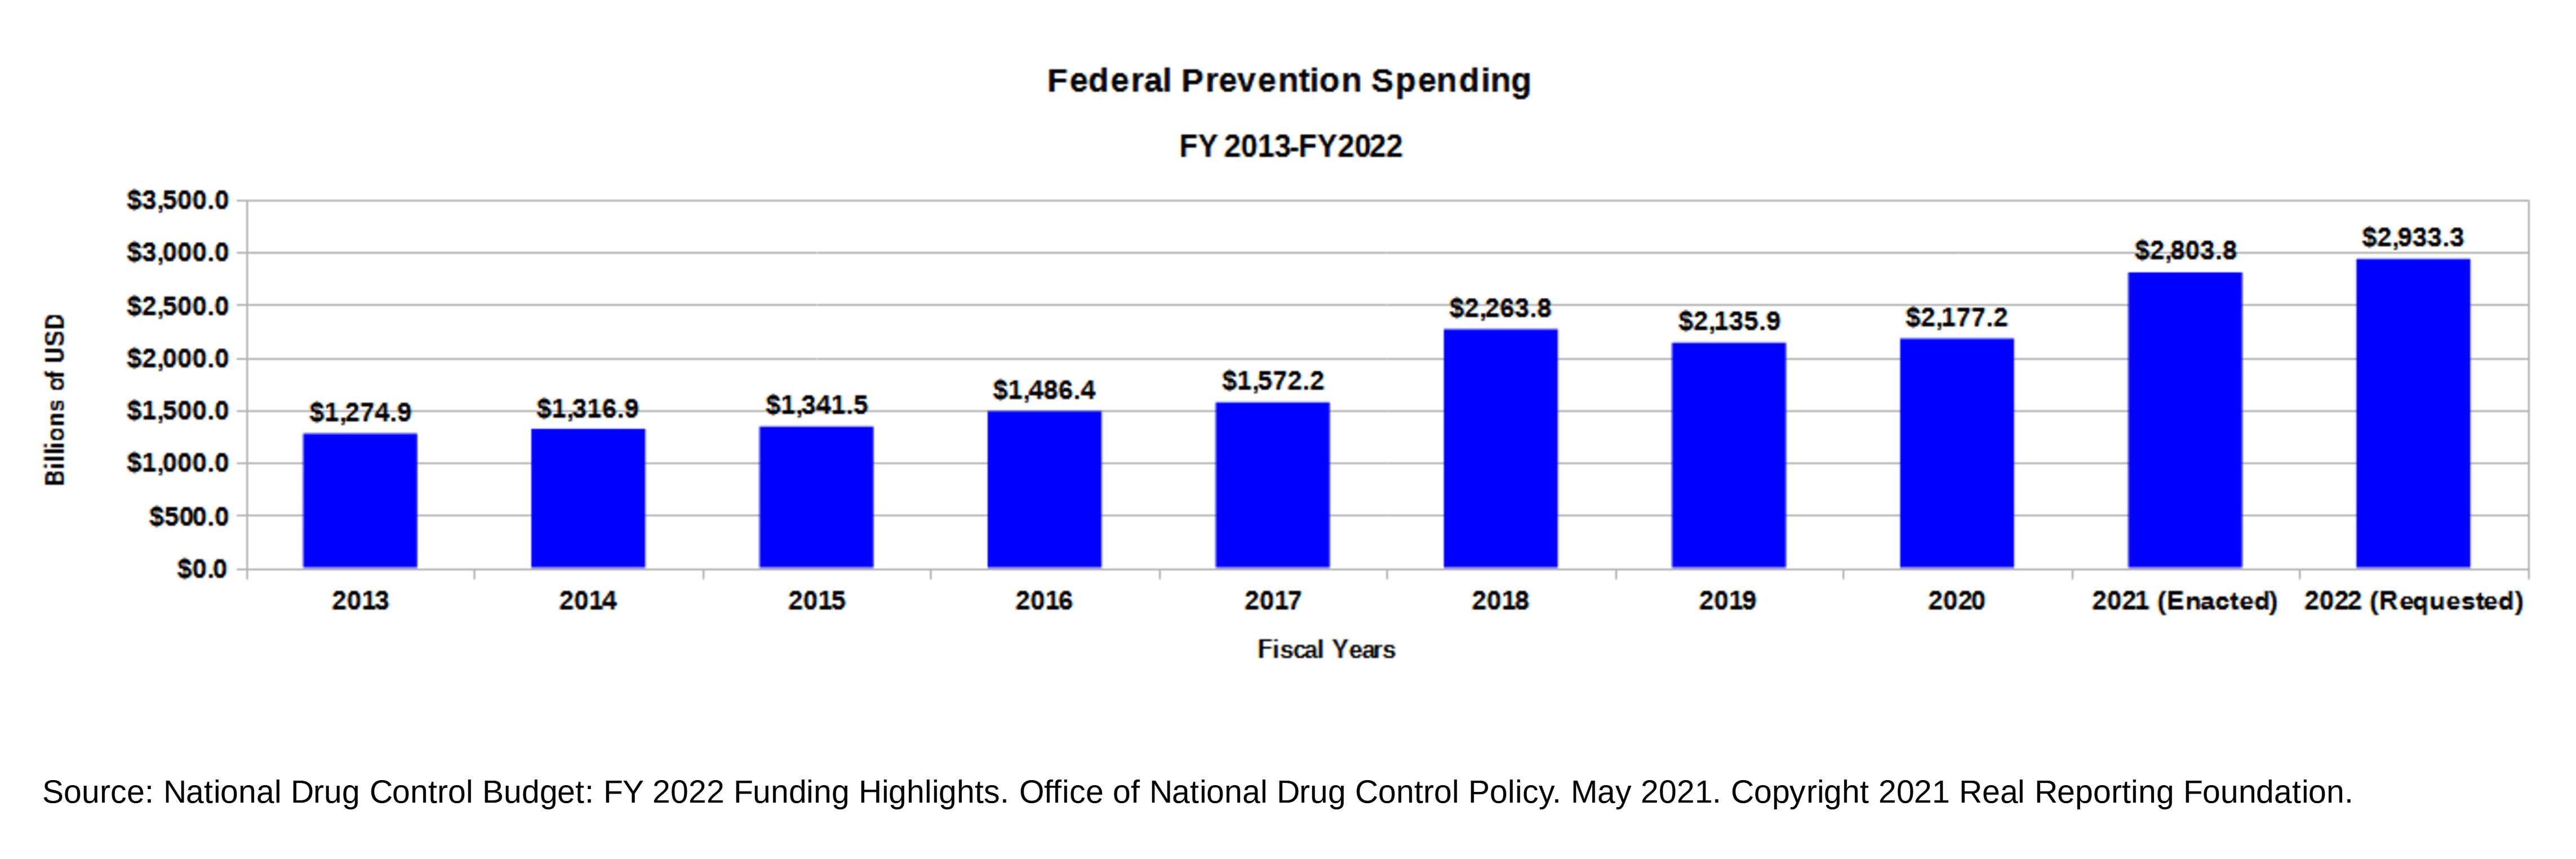 bar graph showing federal drug control spending on prevention from FY2013 through FY2022